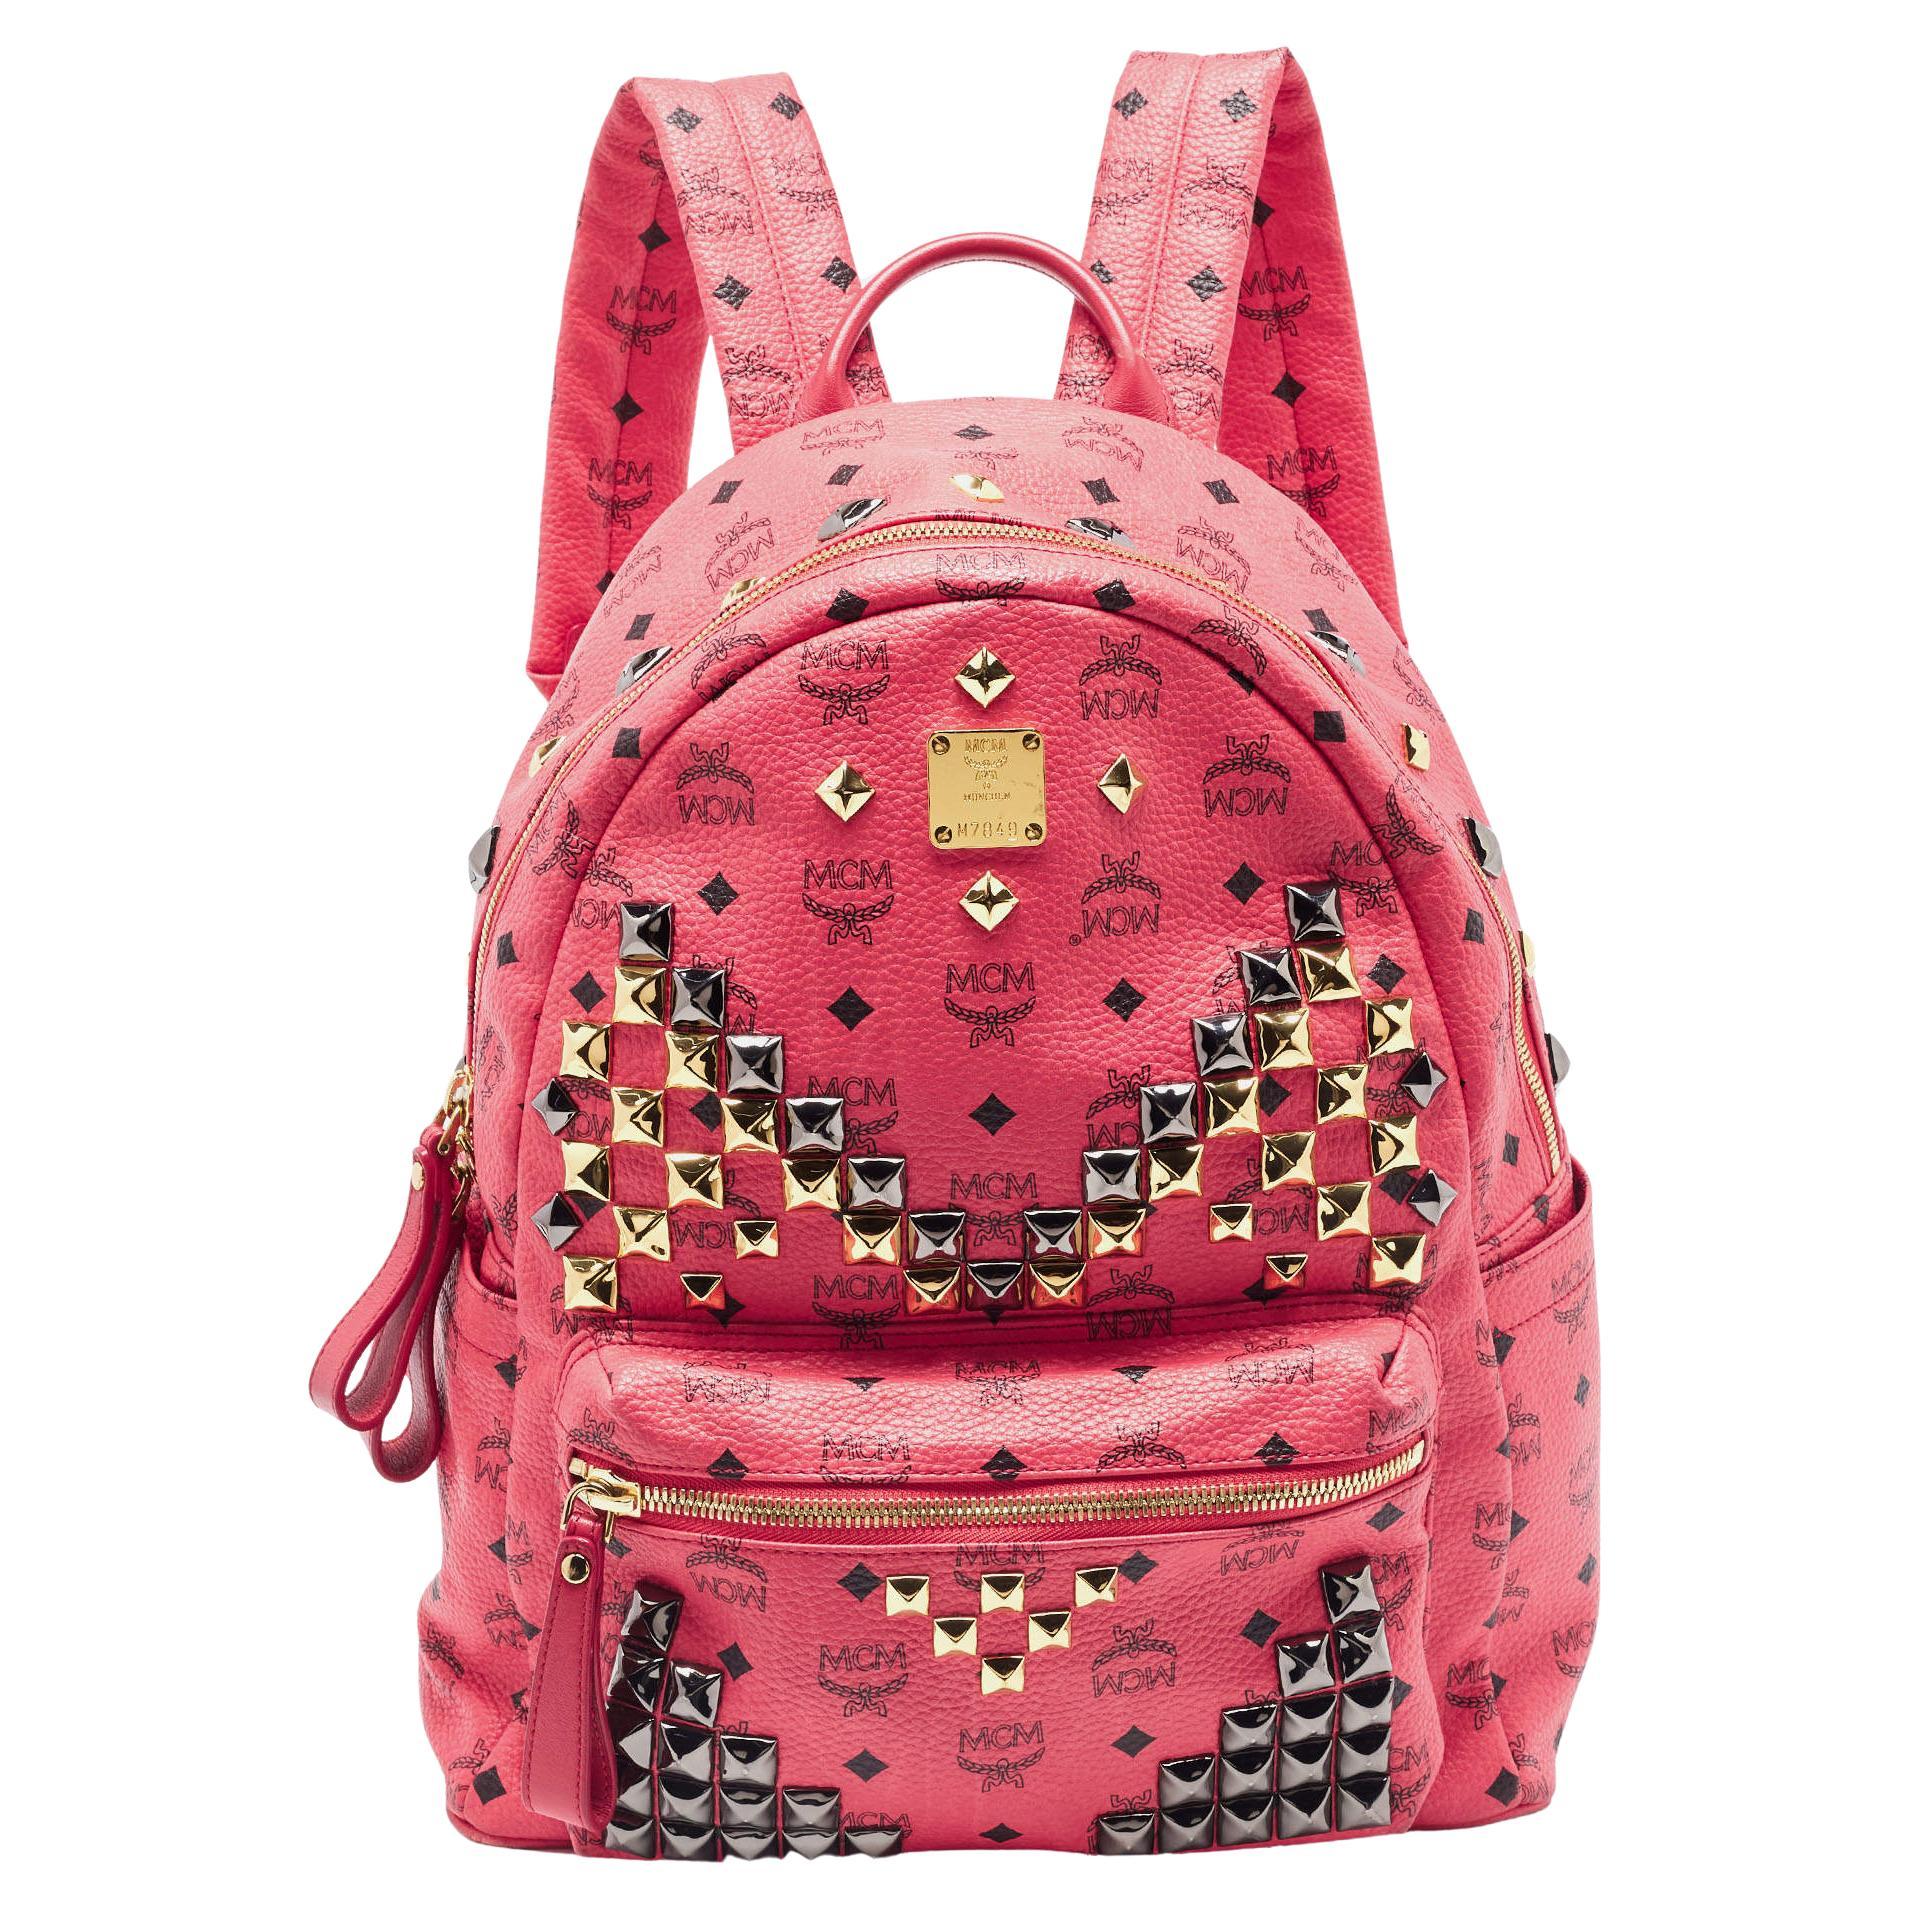 MCM Pink Visetos Coated Canvas and Leather Studs Backpack